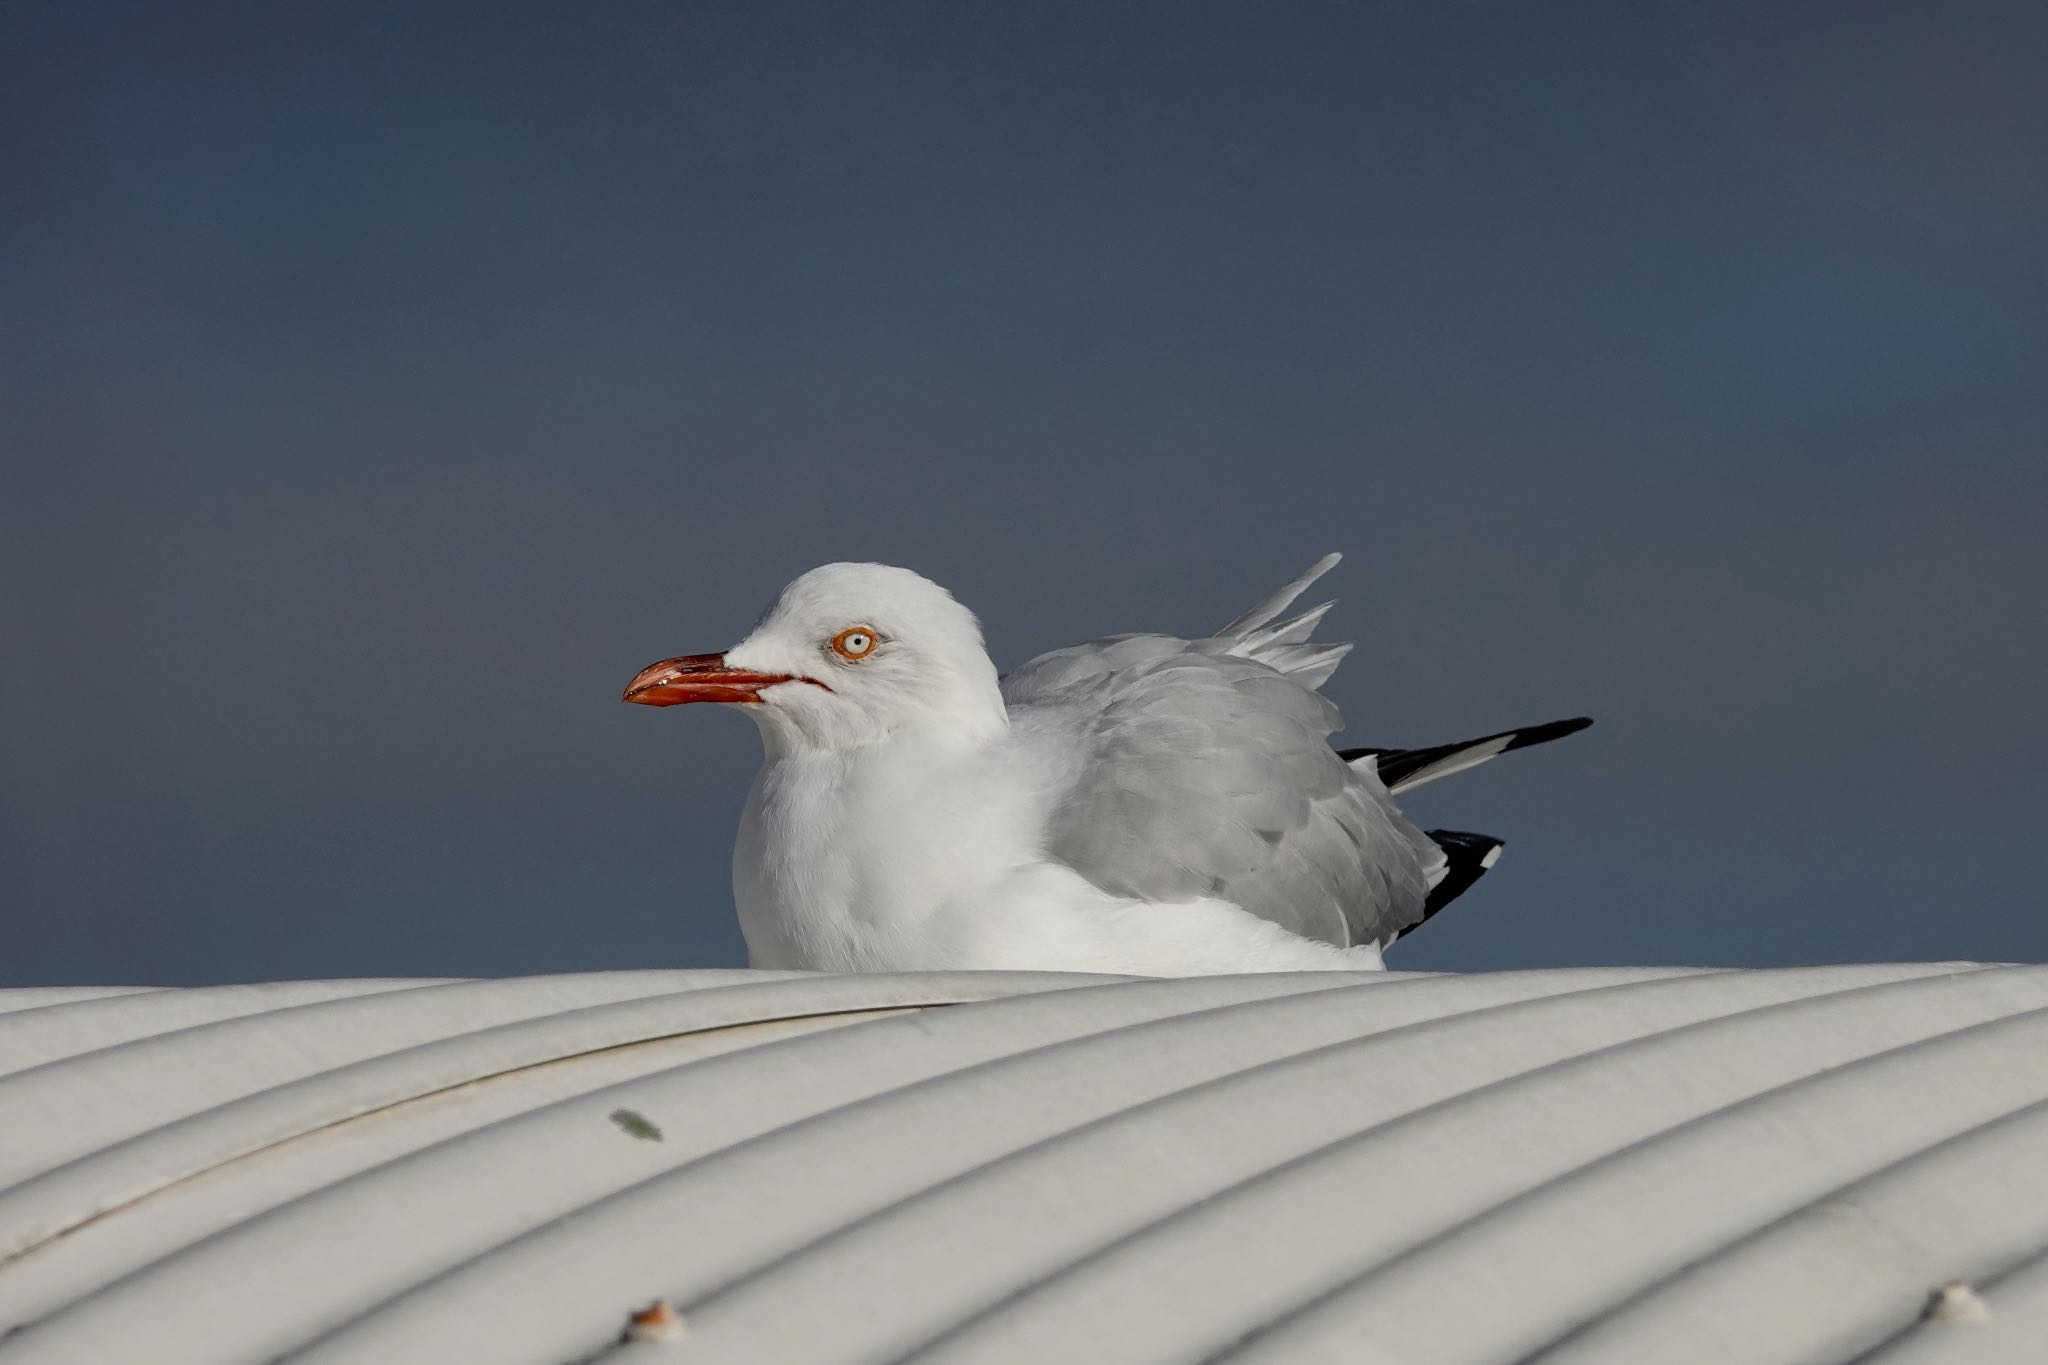 Photo of Silver Gull at シドニー by のどか